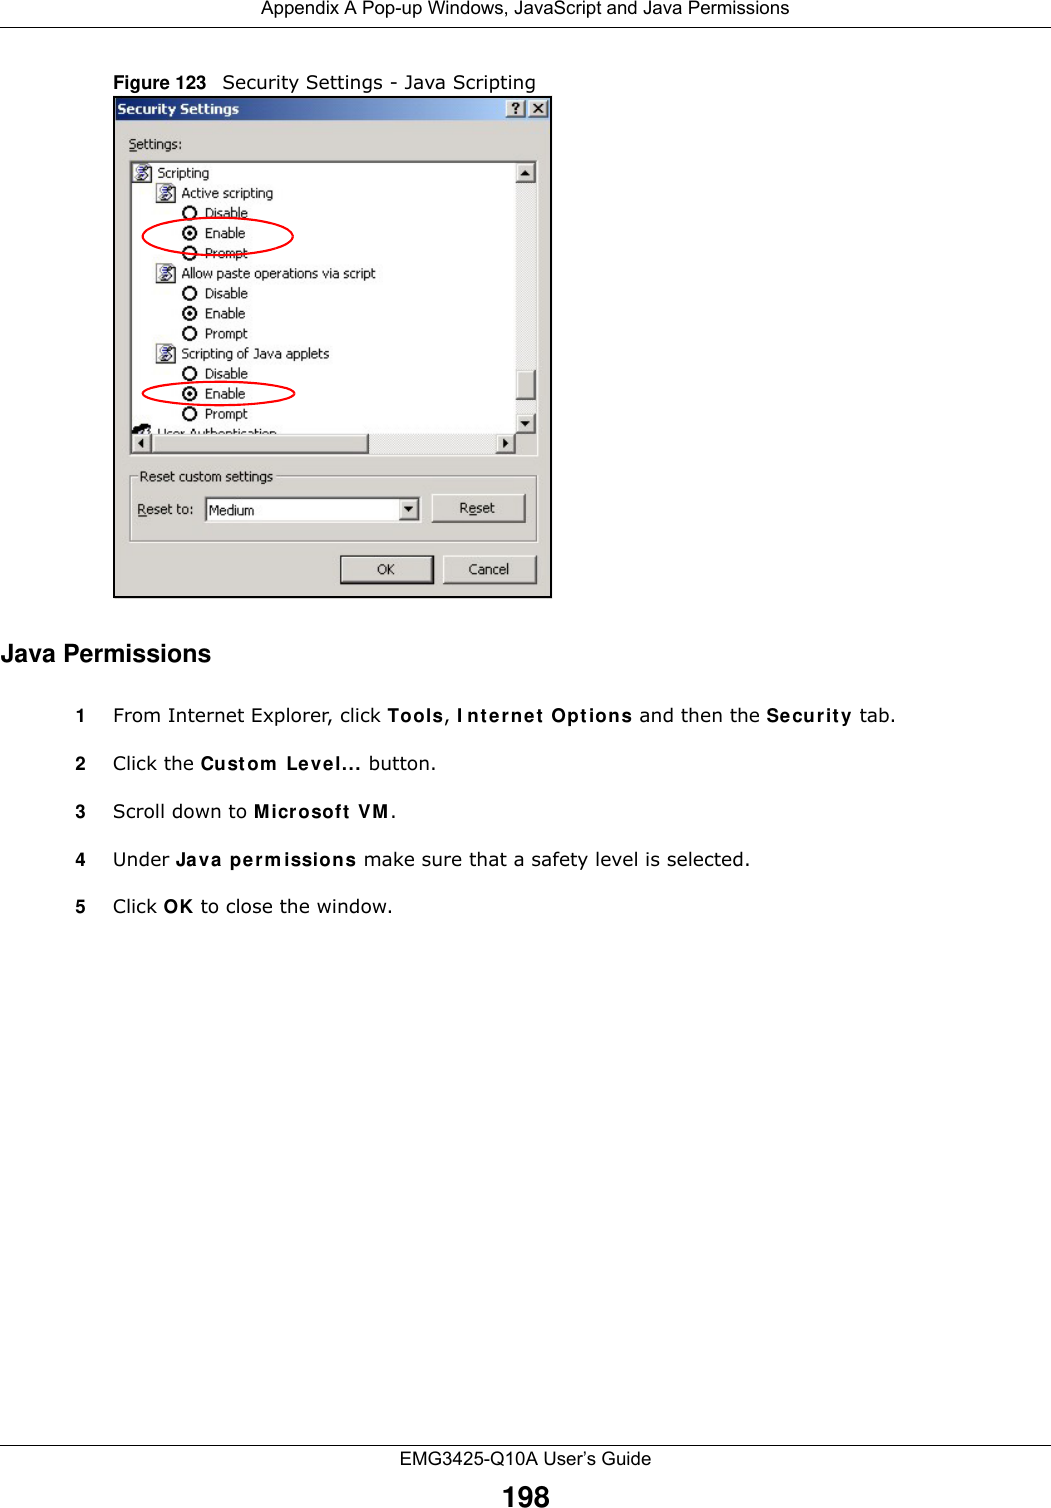 Appendix A Pop-up Windows, JavaScript and Java PermissionsEMG3425-Q10A User’s Guide198Figure 123   Security Settings - Java ScriptingJava Permissions1From Internet Explorer, click Tools, I nt e r ne t  Opt ions and then the Secu r ity tab. 2Click the Custom  Level... button. 3Scroll down to Microsoft  V M . 4Under Java perm issions make sure that a safety level is selected.5Click OK to close the window.